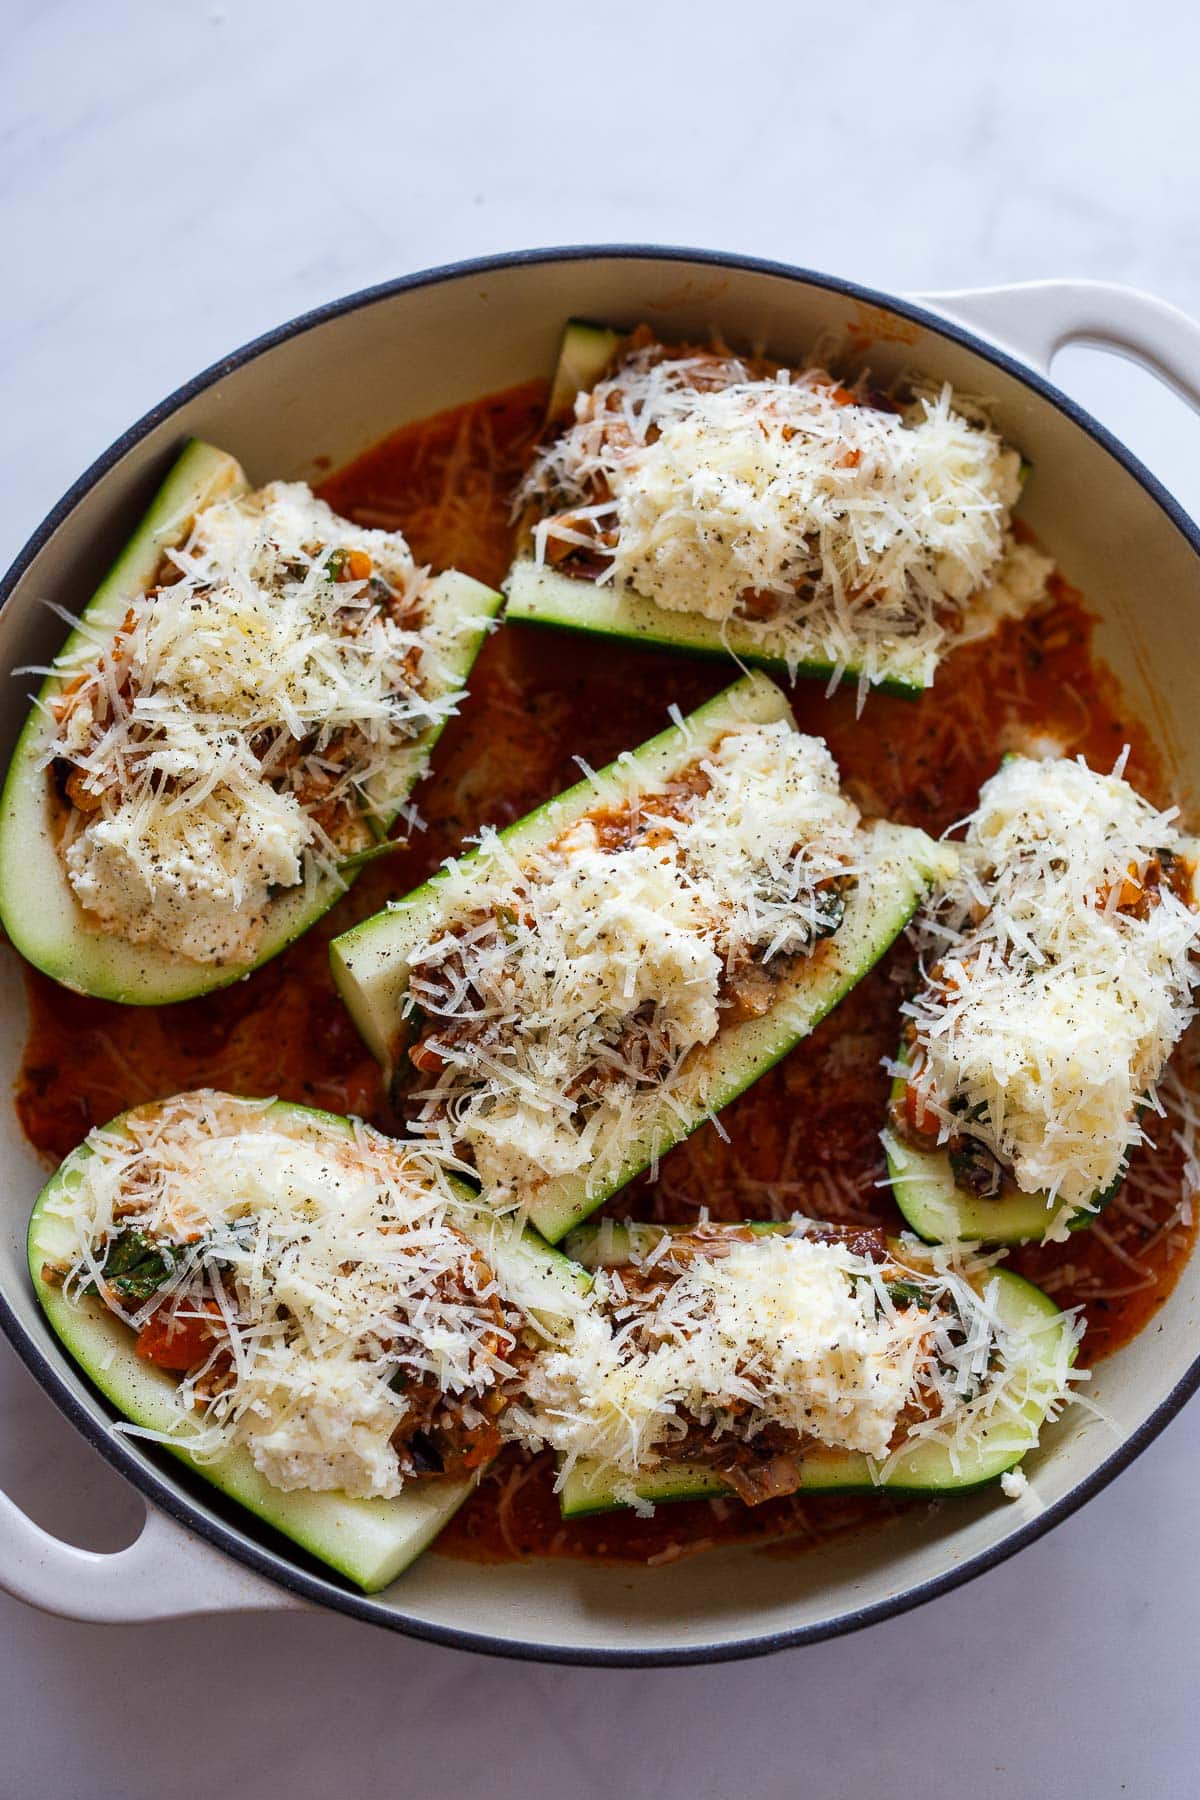 Stuffed zucchini in a pan, unbaked.